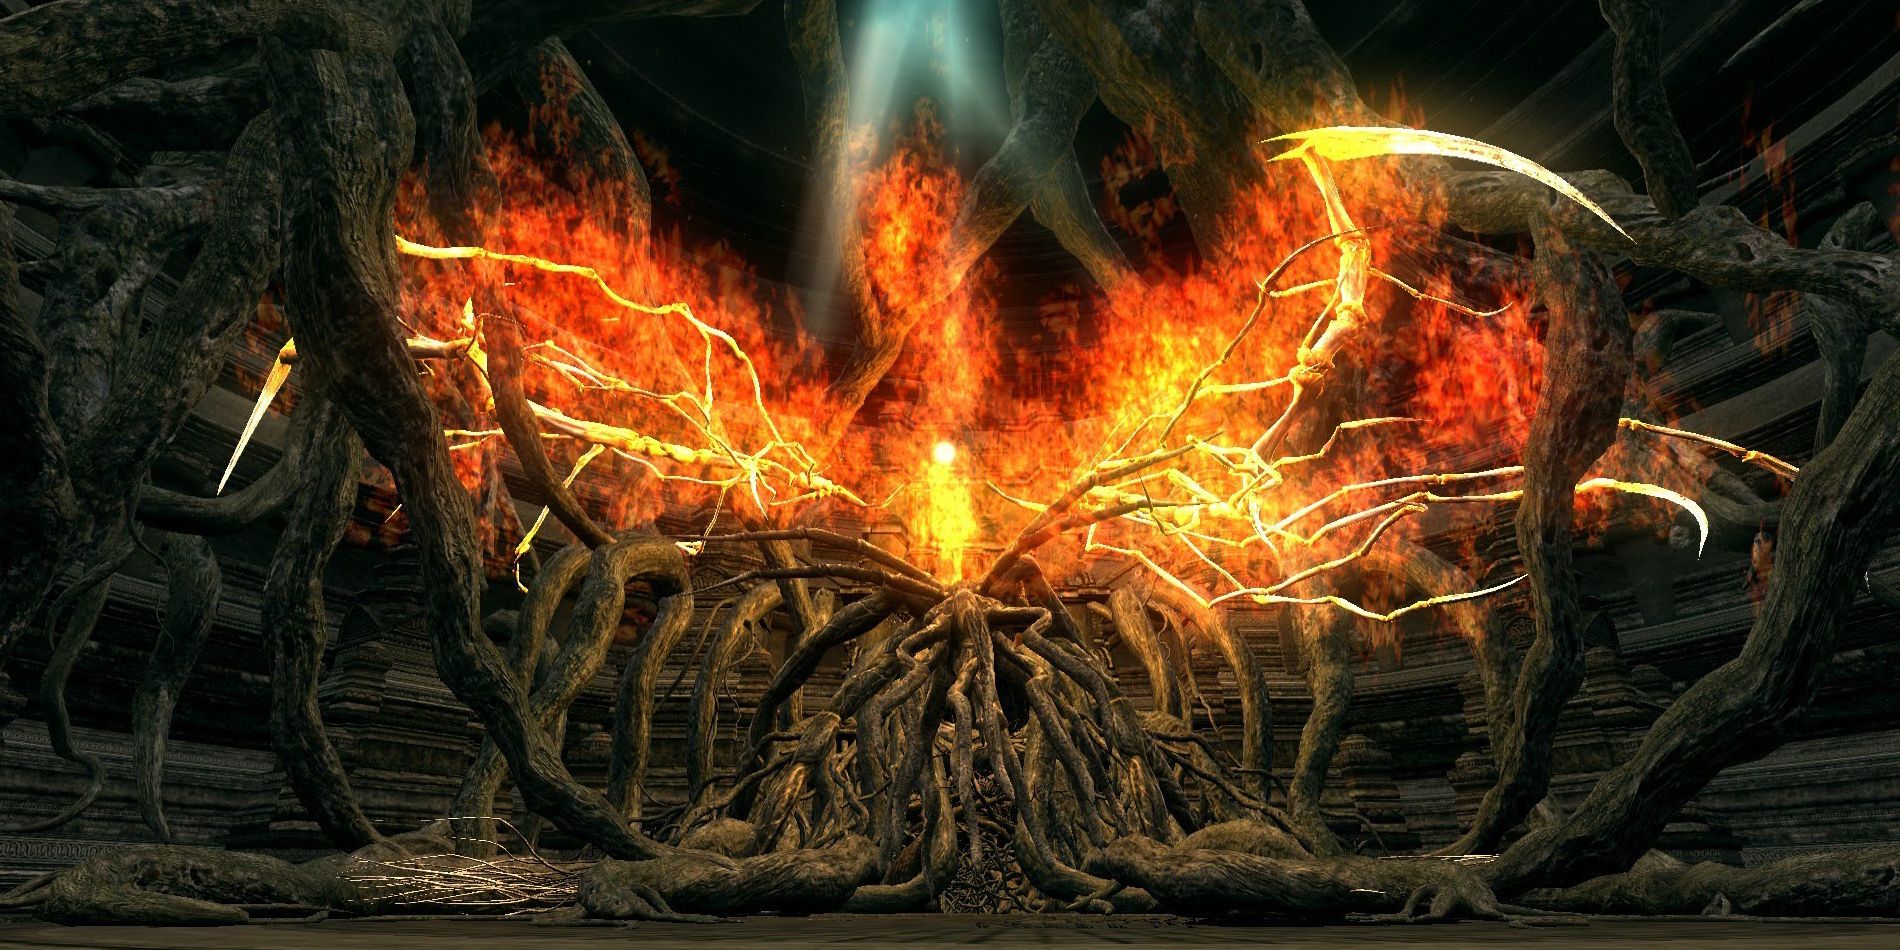 The Bed of Chaos as seen in Dark Souls